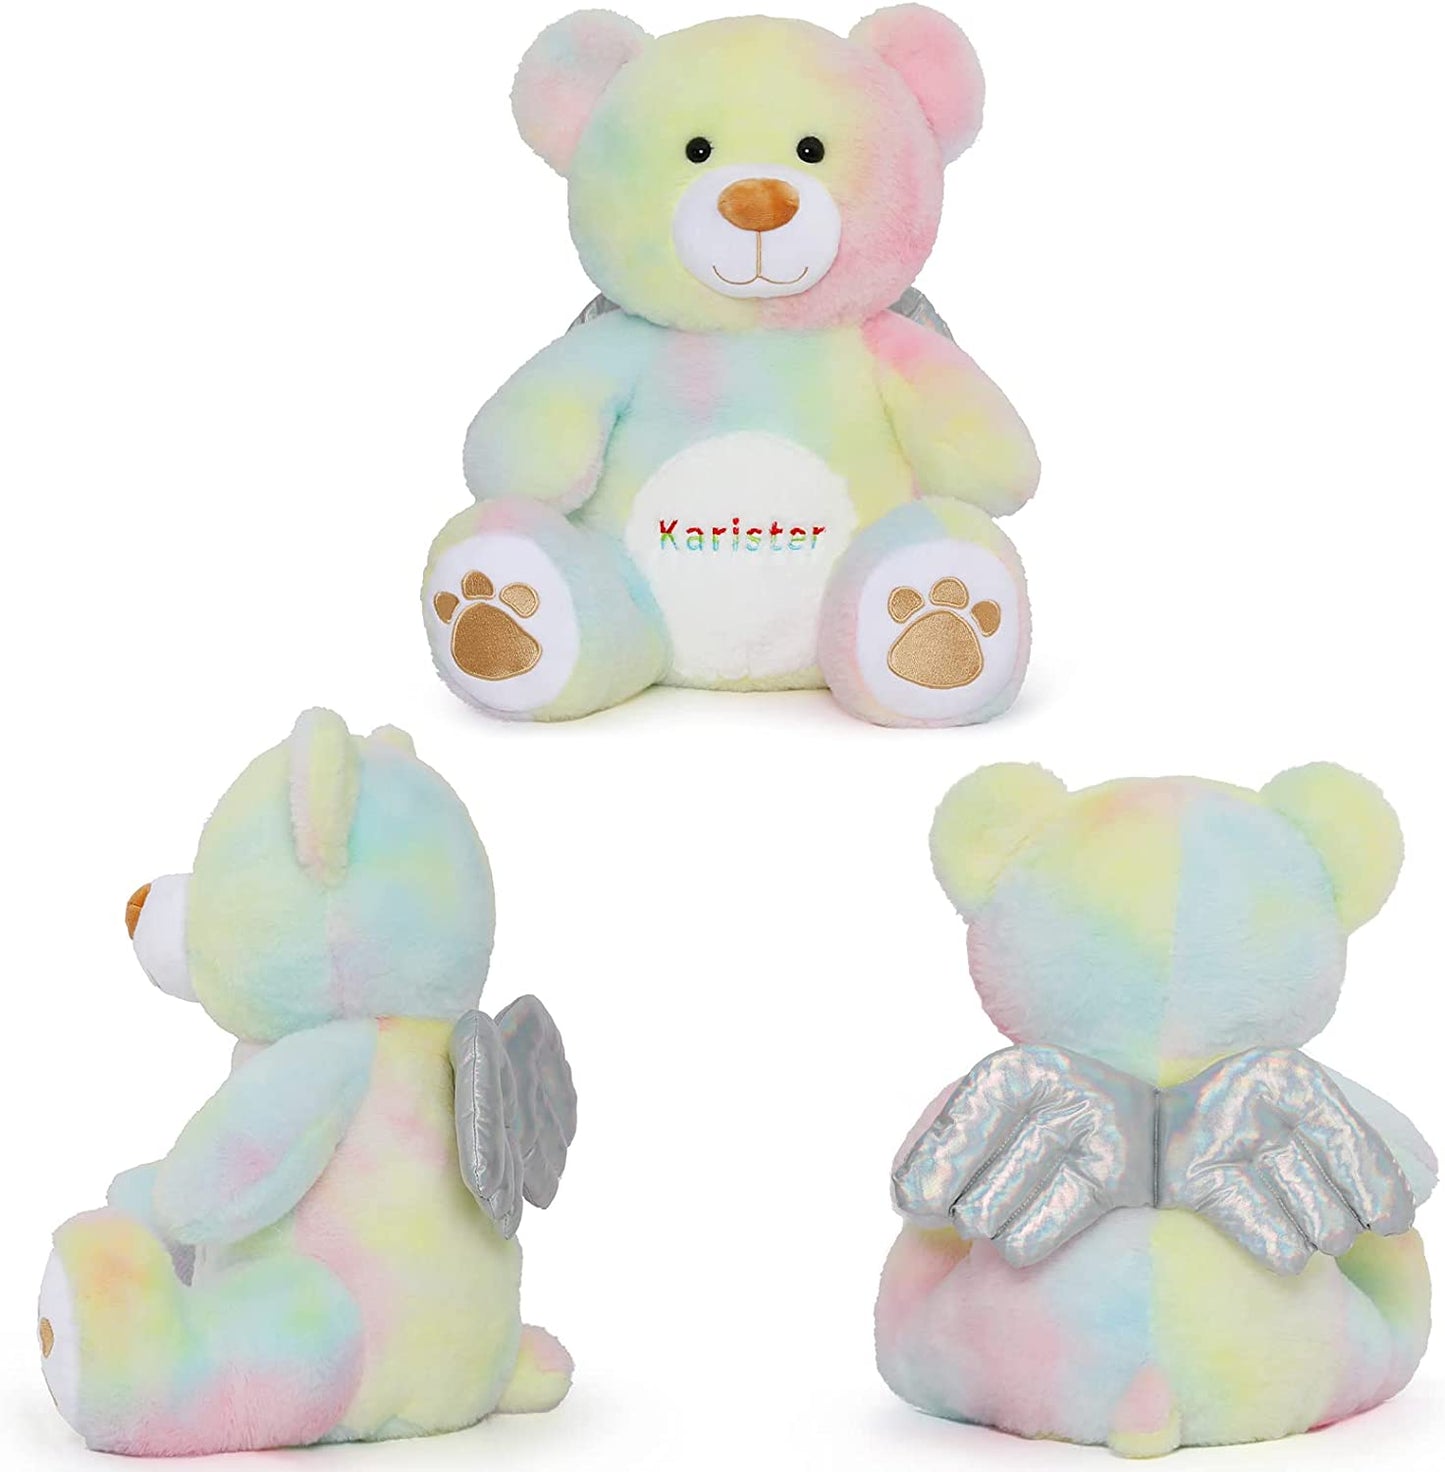 Angel Teddy Bear Plush Toy with Wings, 15.4 Inches - MorisMos Stuffed Animals